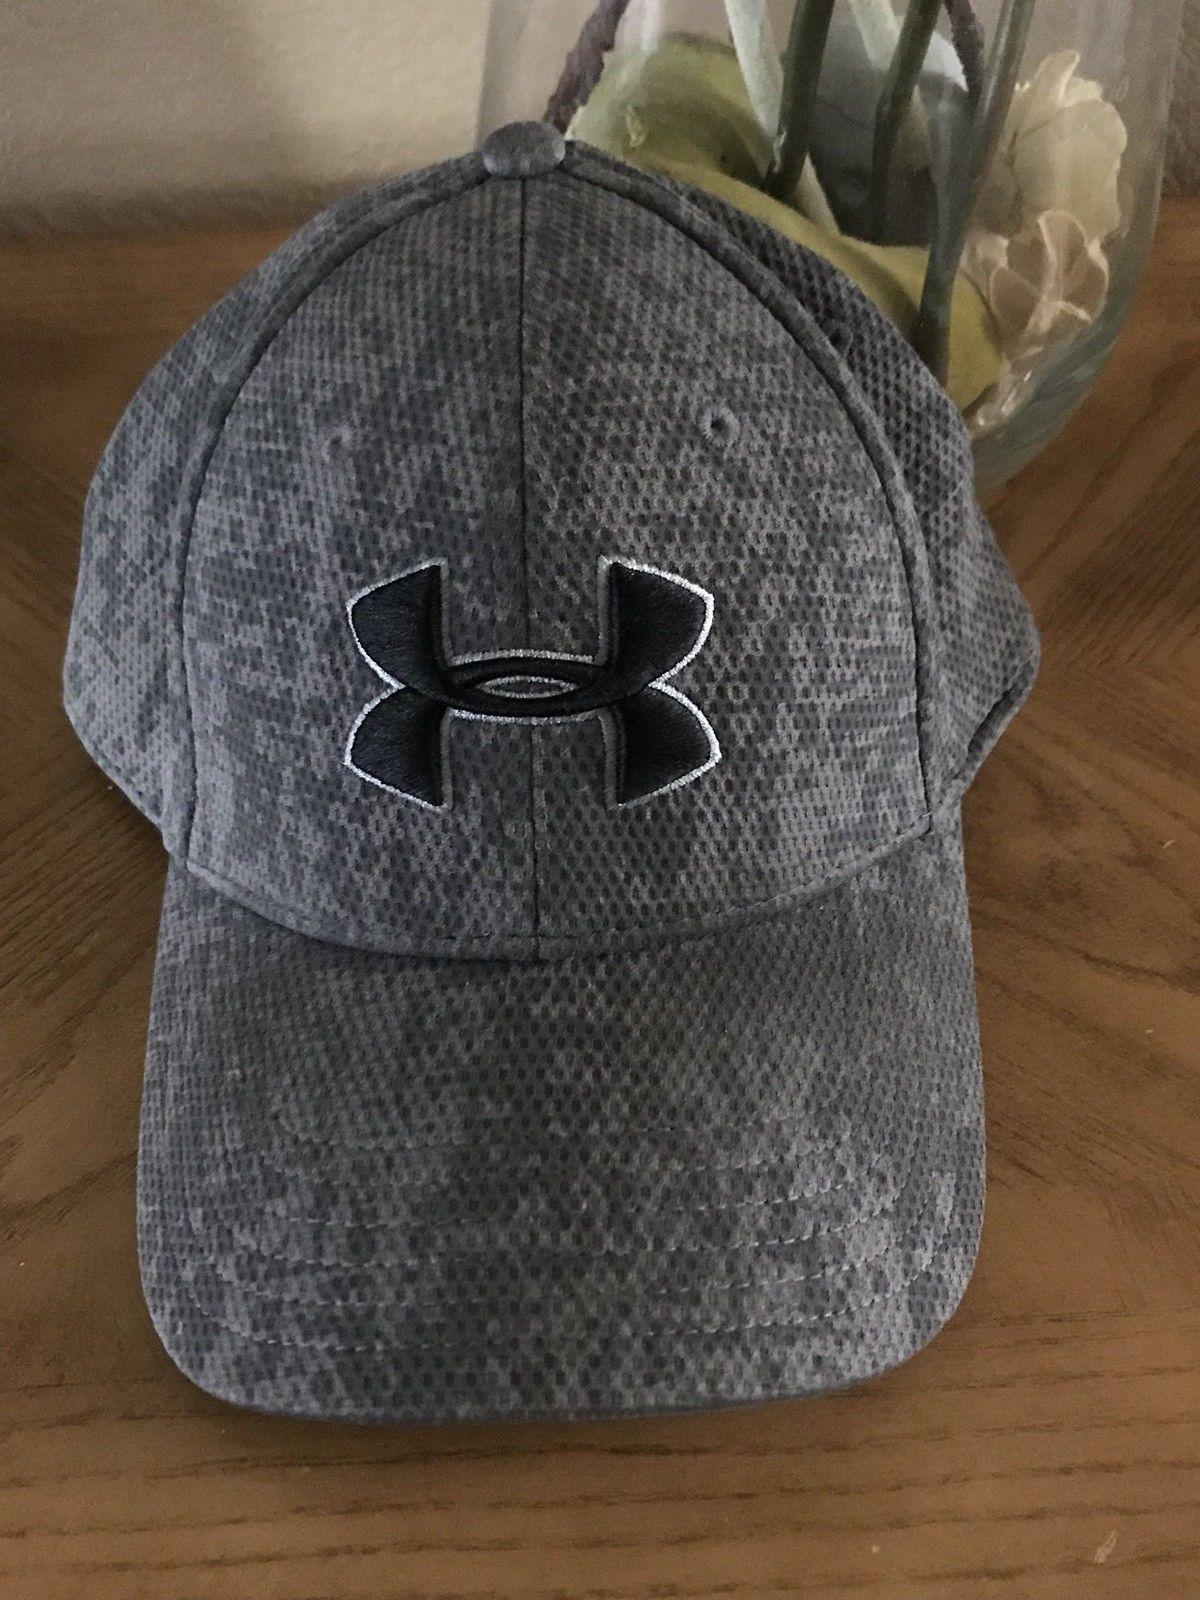 Digital Camo Under Armour Logo - Fitted Under Armour Grey Shaded Digital XL Camo Hat LG / XL Digital ...